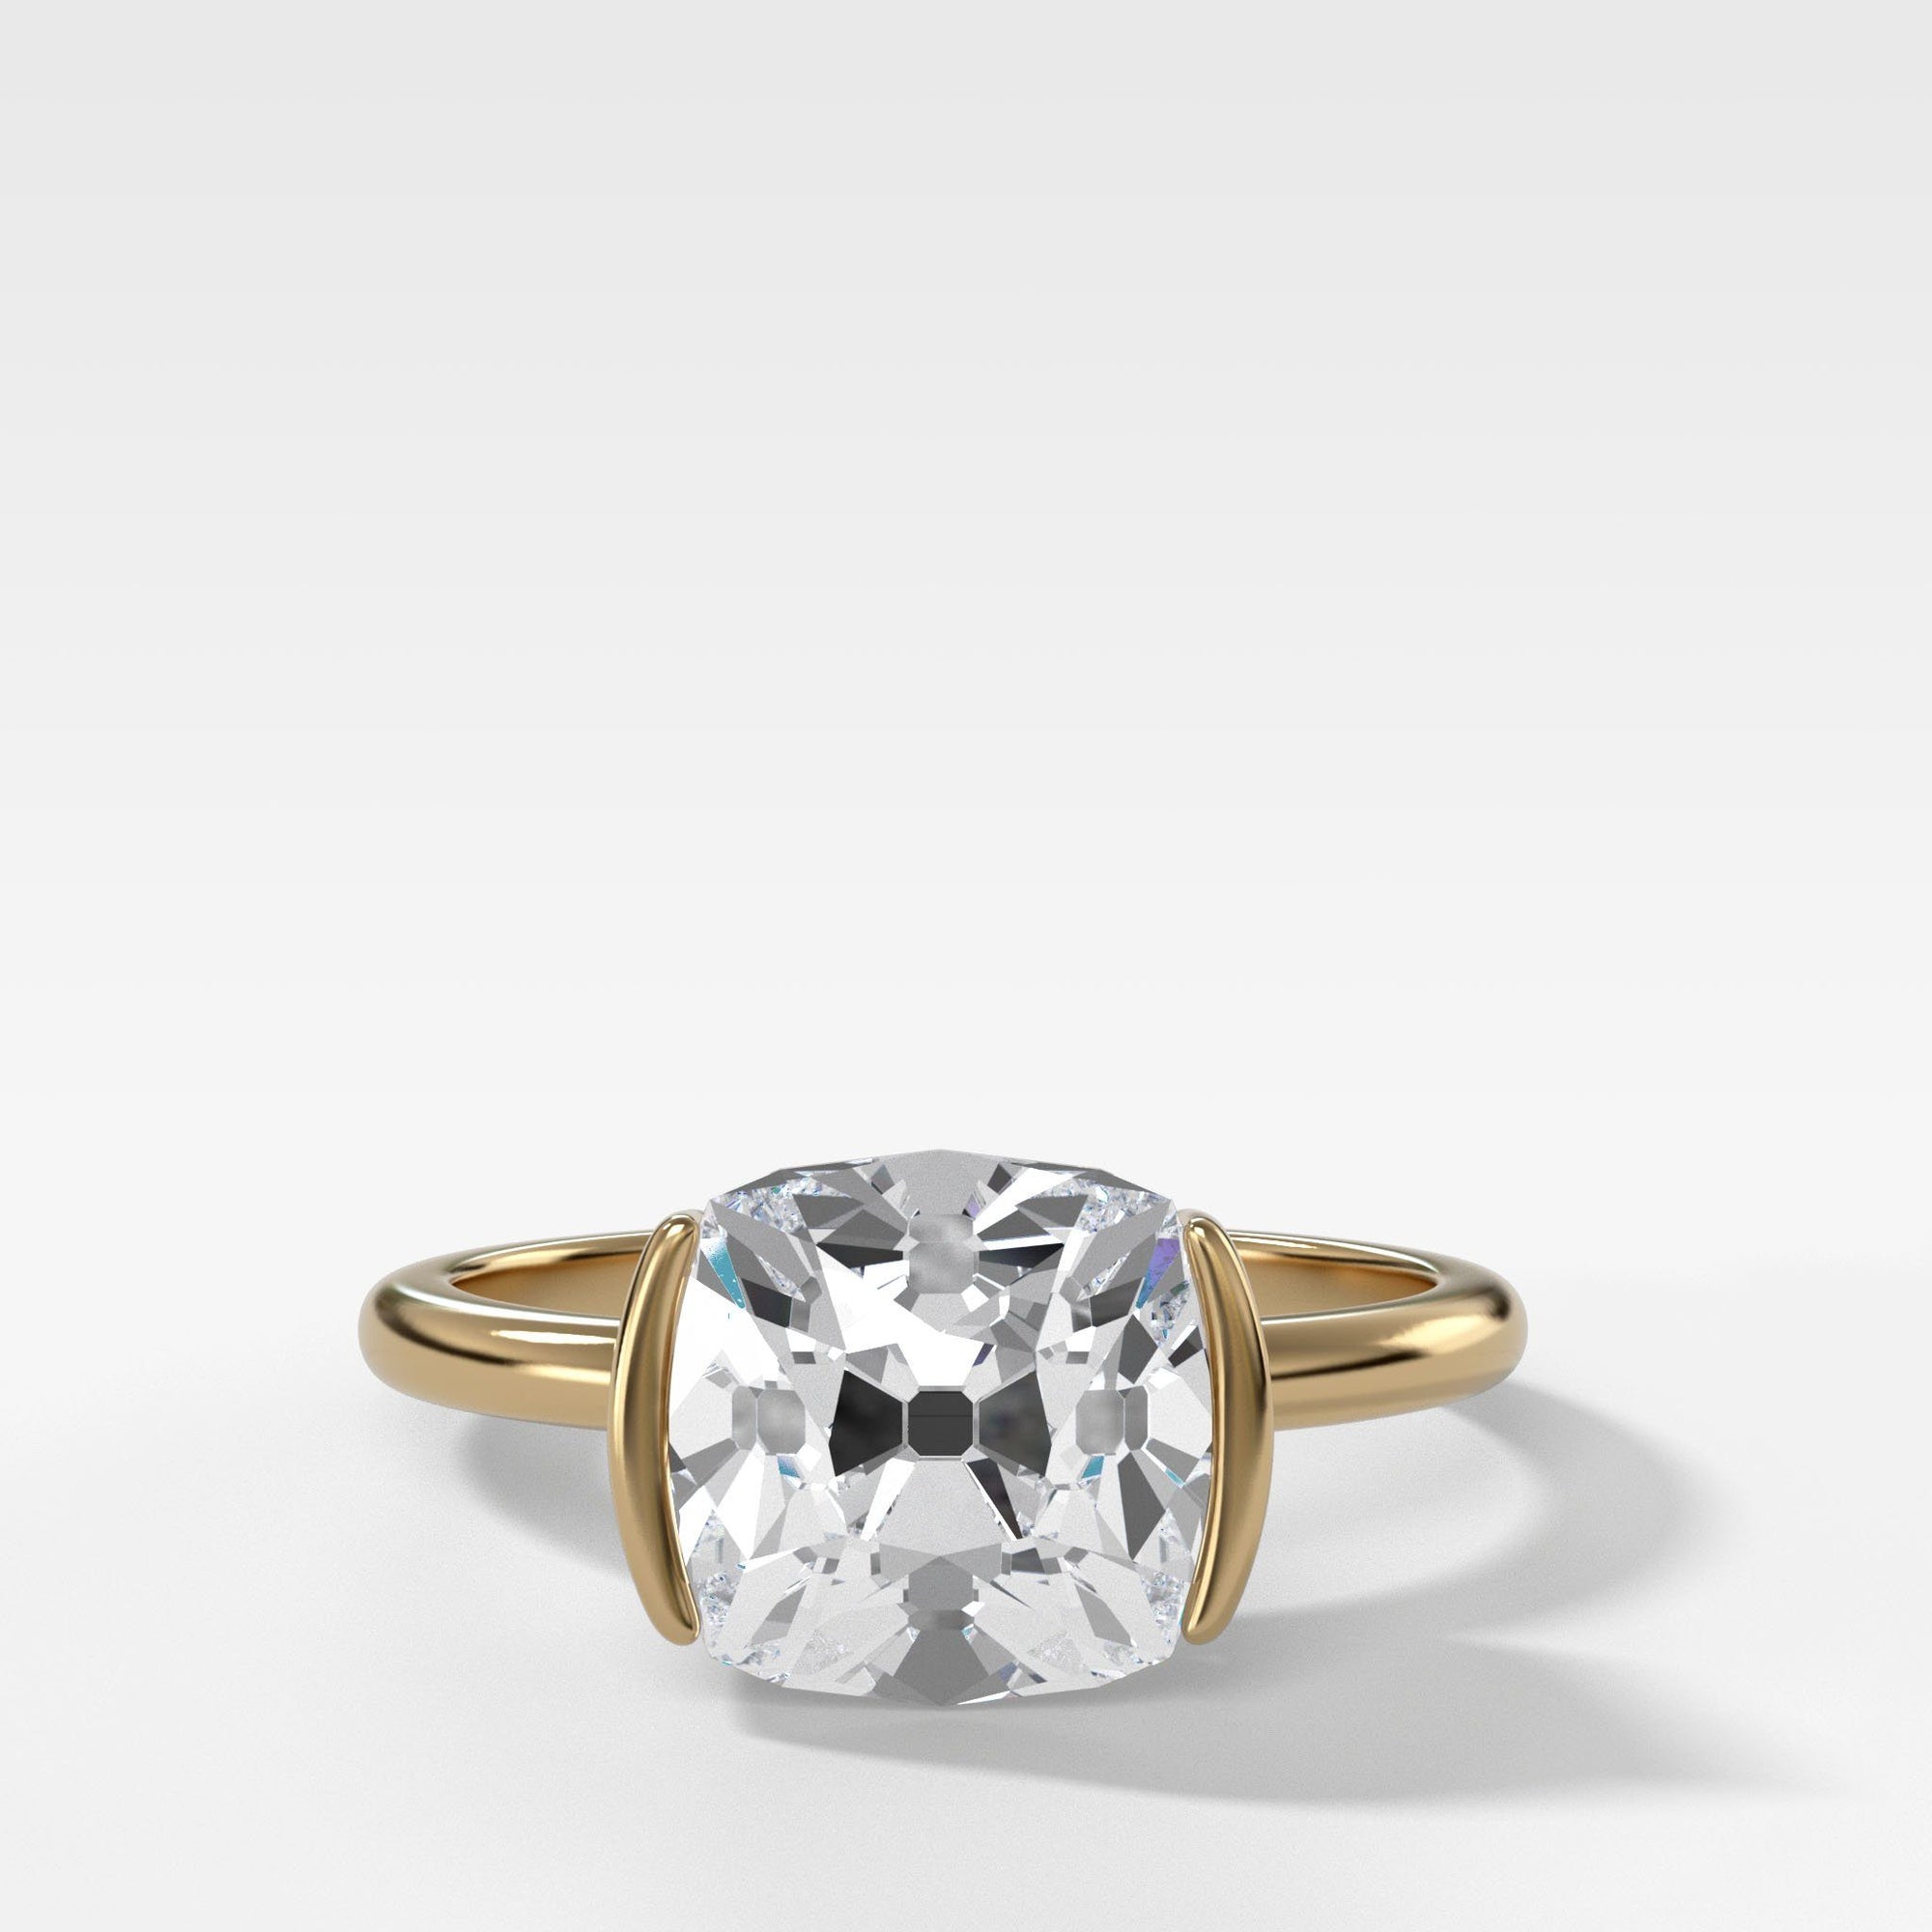 Half Bezel Solitaire Engagement Ring With Old Mine Cut in Yellow Gold by Good Stone